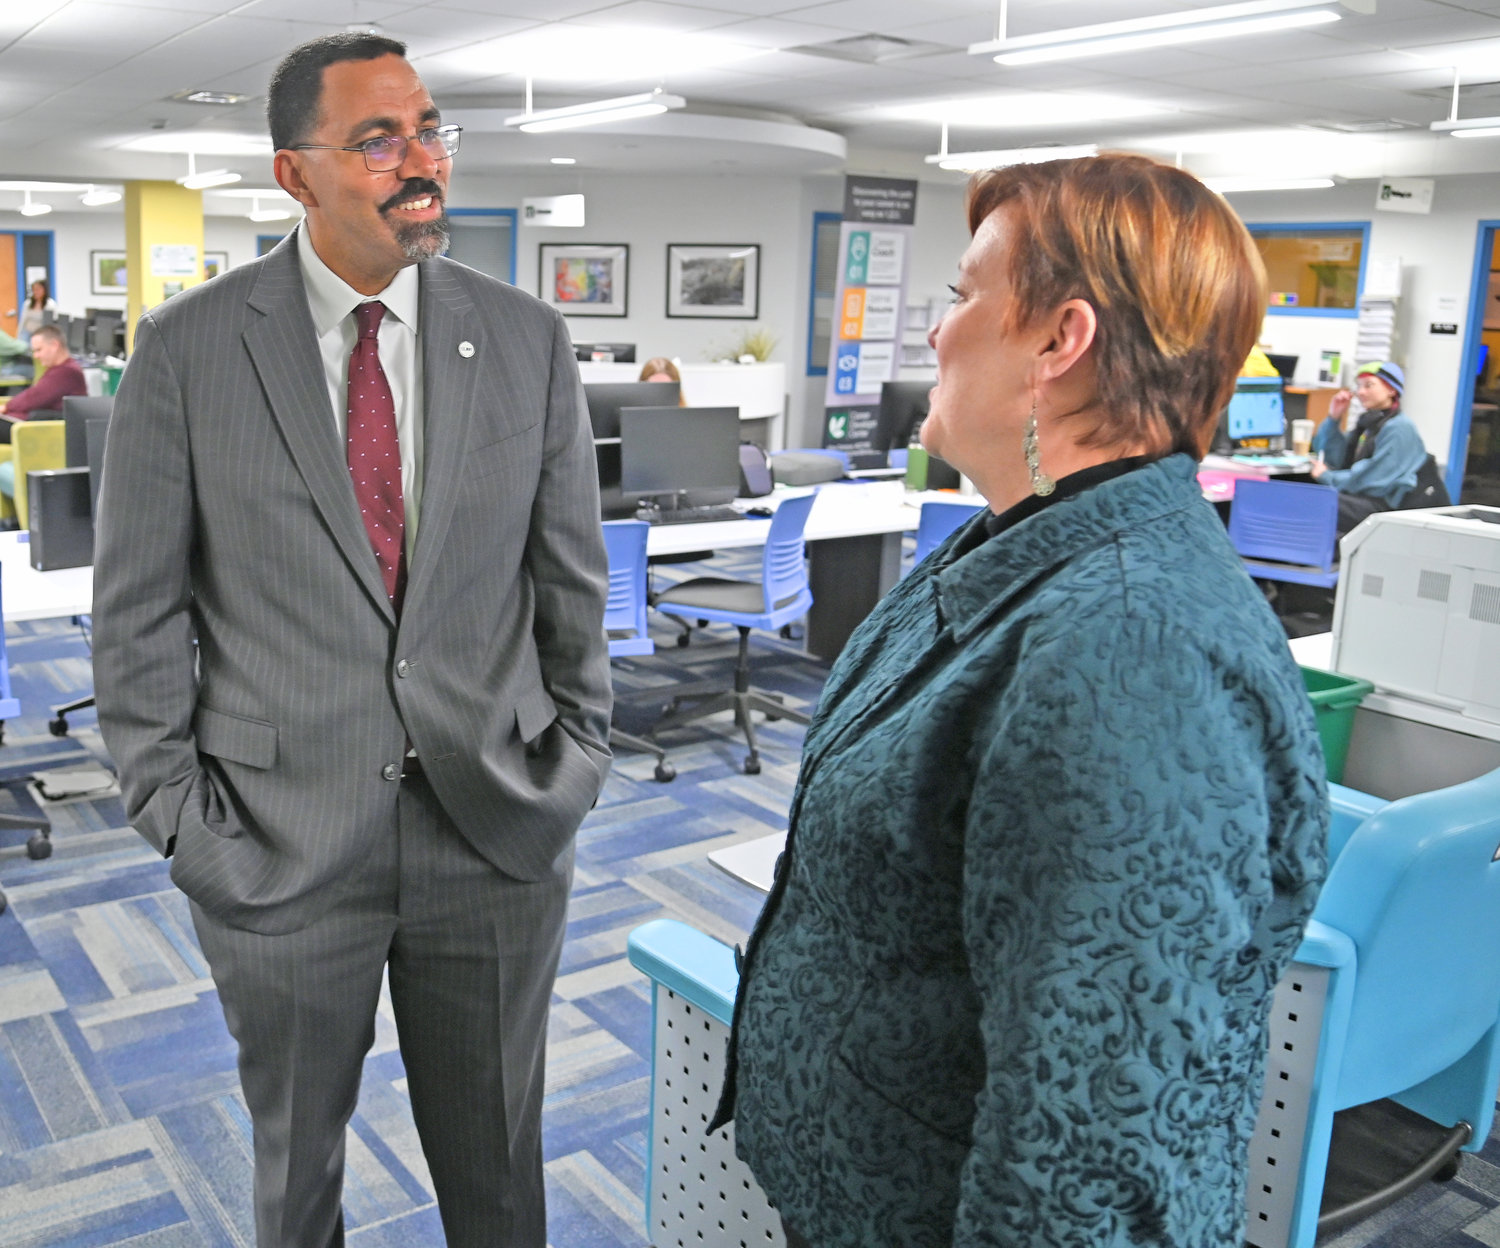 SUNY Chancellor John B. King, left, tours the MVCC tutoring center Wednesday, March 1 in Utica and talks with Tamara Mariotti, coordinator of the Office of Accessibility Resources at MVCC.